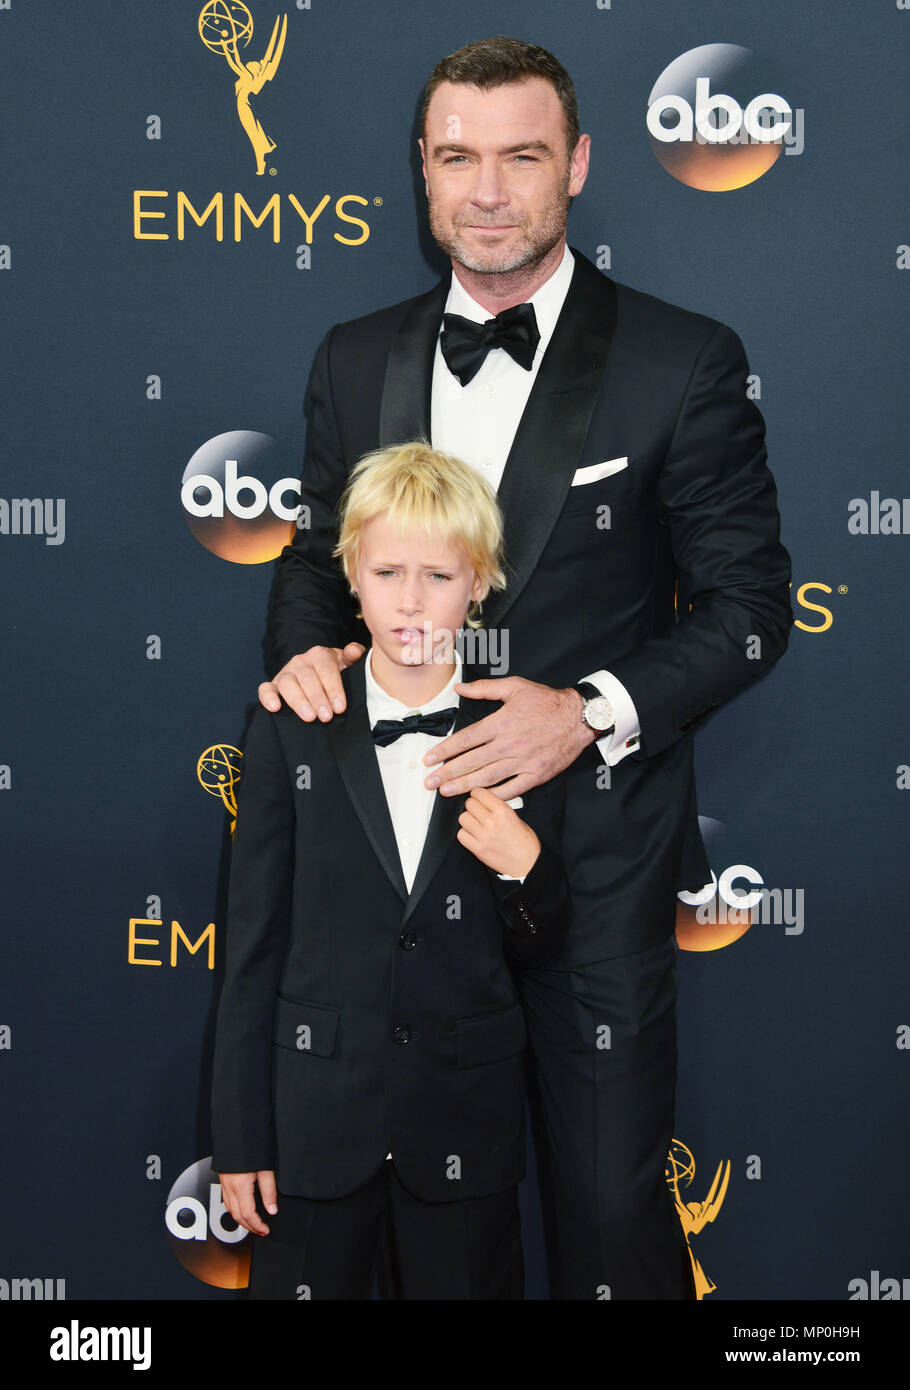 Liev Schreiber, Alexander Schreiber 071 at the 68th Emmy Awards 2016 at the Microsoft Theatre in Los Angeles. September 18, 2016.Liev Schreiber, Alexander Schreiber 071 ------------- Red Carpet Event, Vertical, USA, Film Industry, Celebrities,  Photography, Bestof, Arts Culture and Entertainment, Topix Celebrities fashion /  Vertical, Best of, Event in Hollywood Life - California,  Red Carpet and backstage, USA, Film Industry, Celebrities,  movie celebrities, TV celebrities, Music celebrities, Photography, Bestof, Arts Culture and Entertainment,  Topix, vertical,  family from from the year , 2 Stock Photo